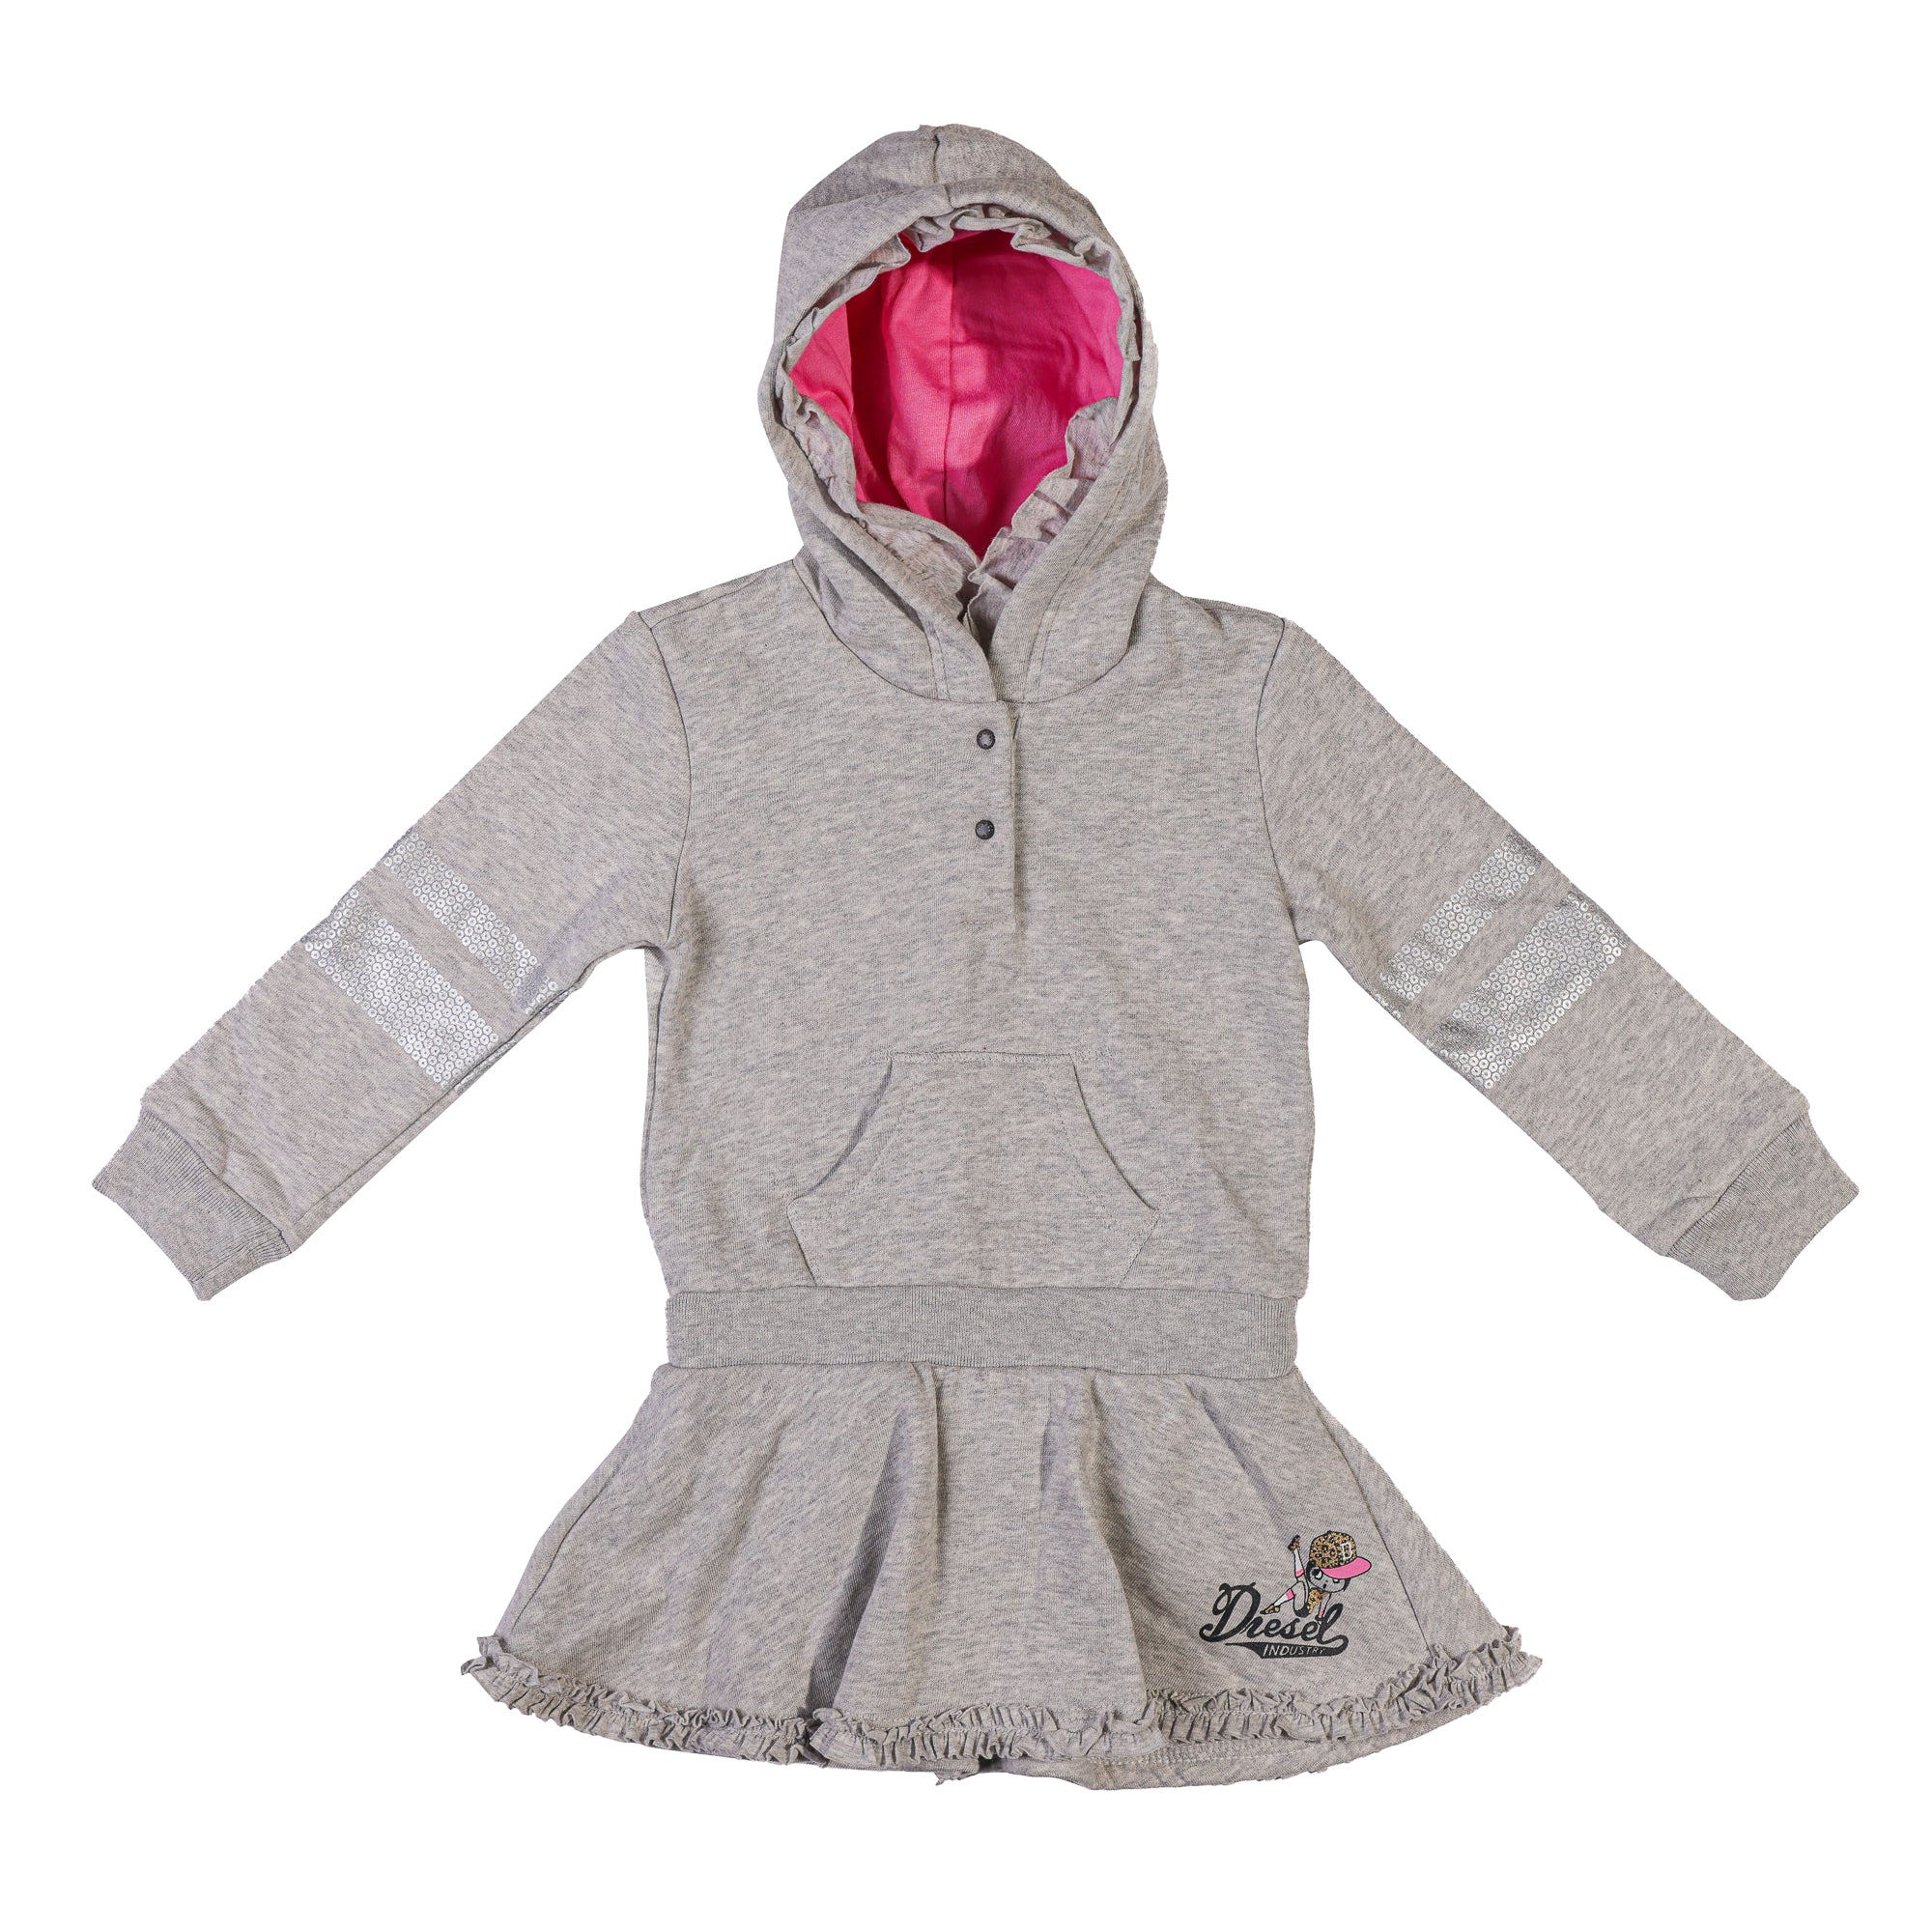 grey long-sleeve hooded baby dress by Diesel, with dropped waist silhouette, kangaroo pockets and a cozy hood